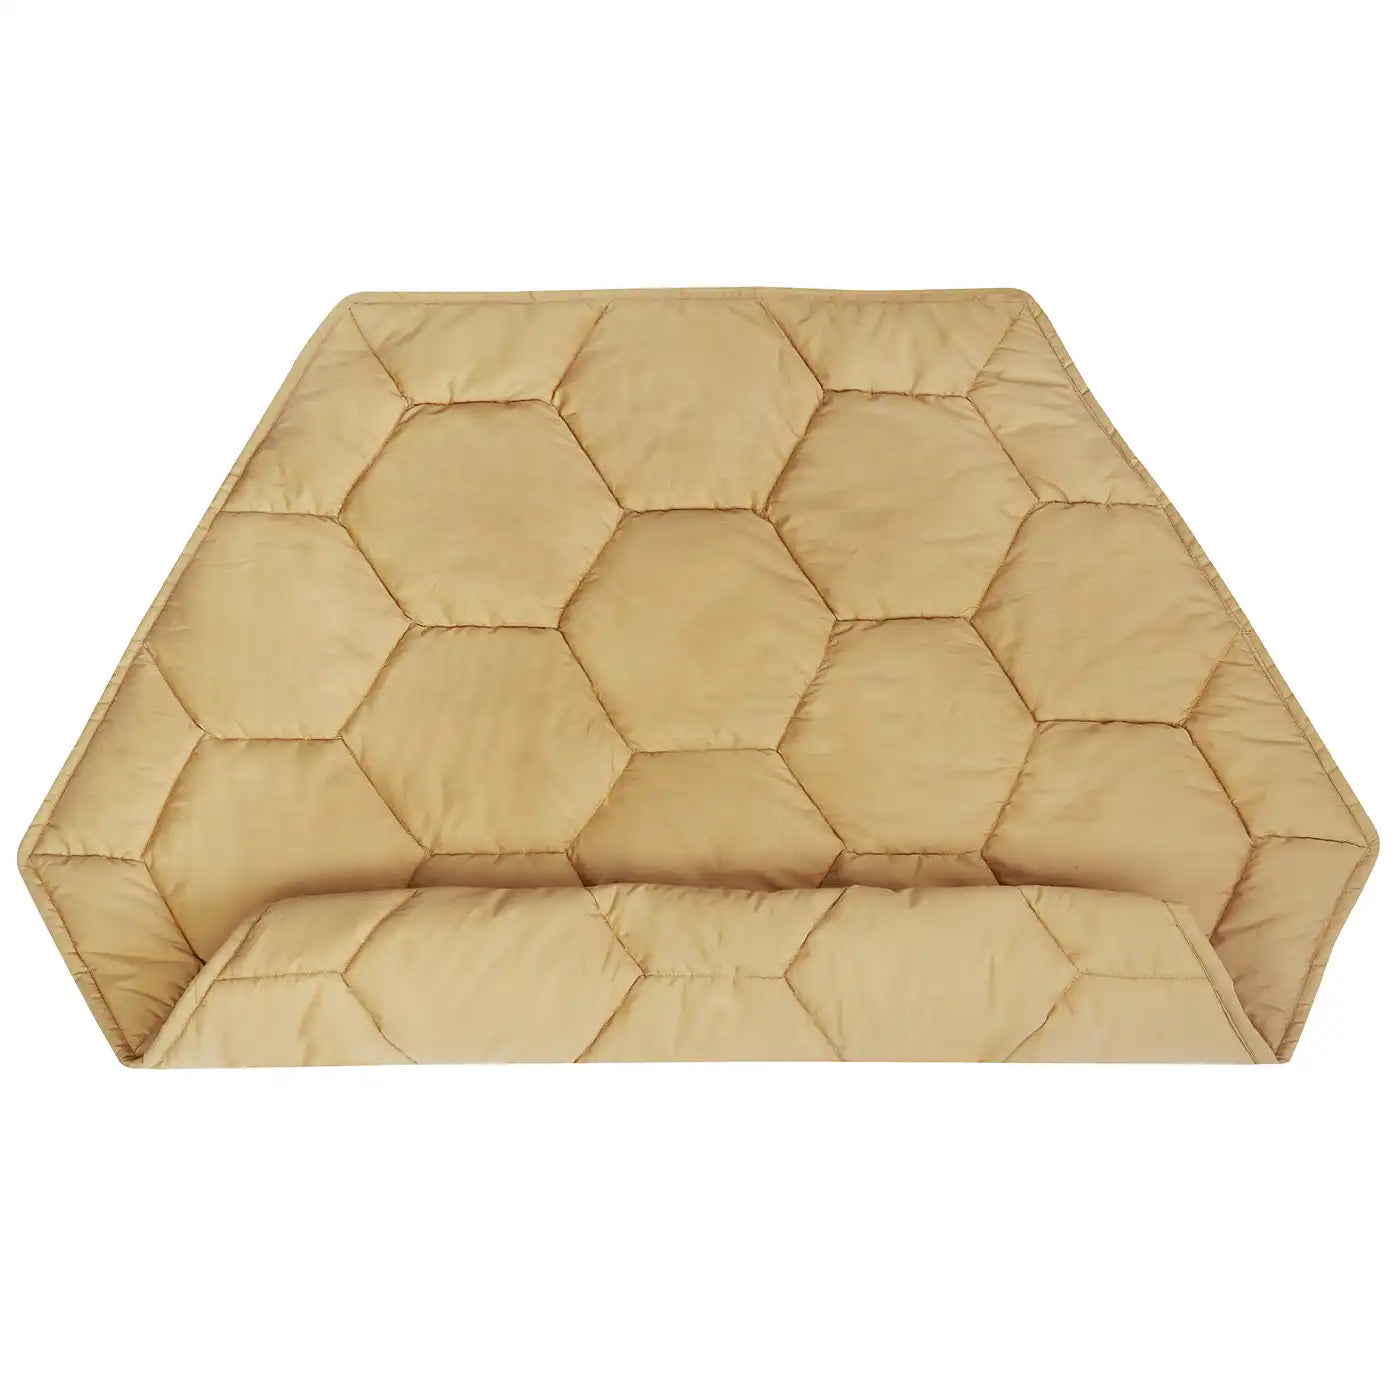 Lorena Canals Honeycomb Playmat (Planet Bee Collection)